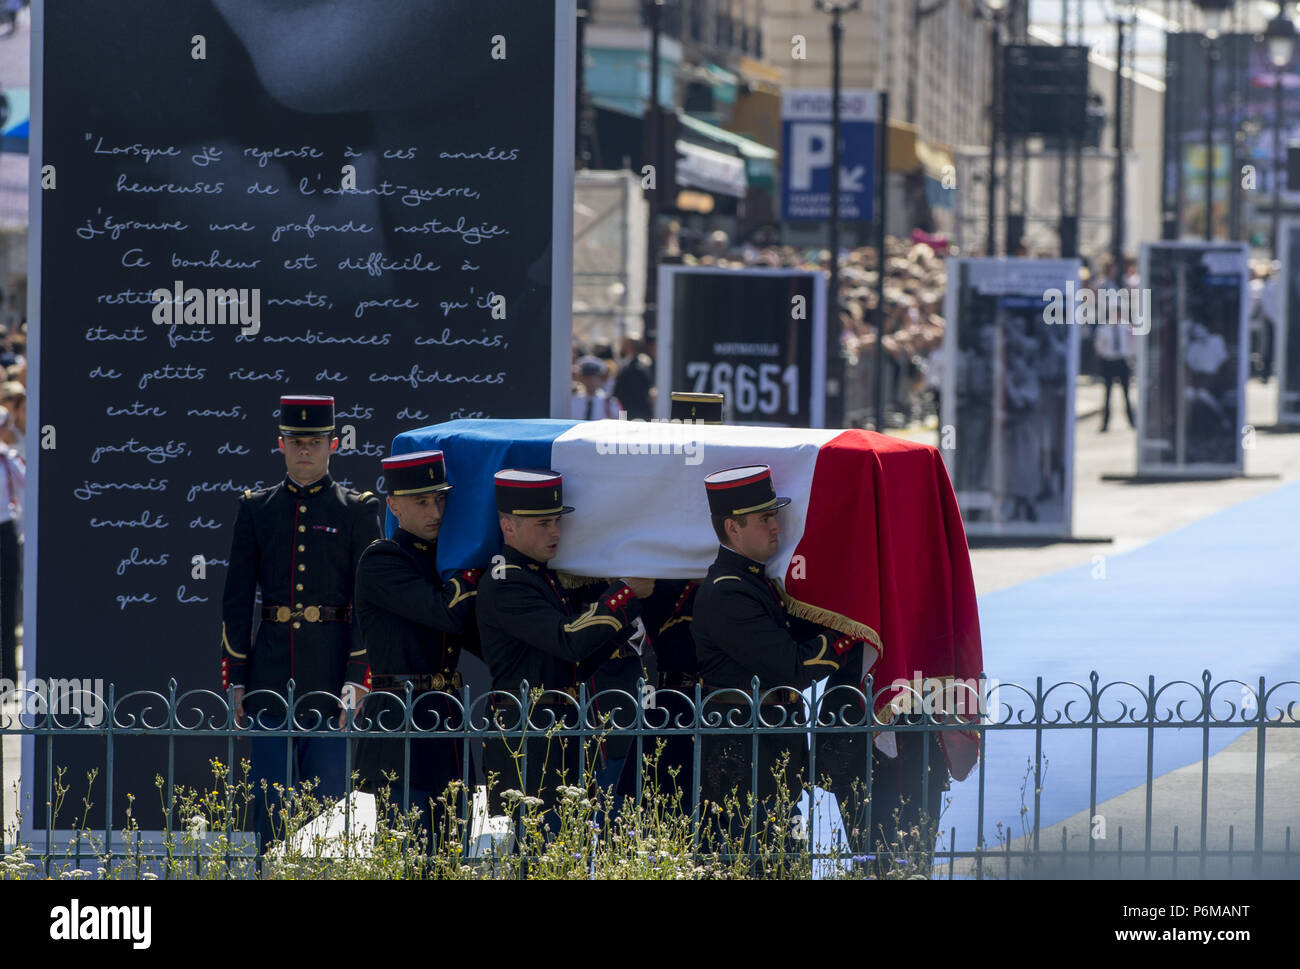 Paris, Ile de France, France. 1st July, 2018. Soldiers are seen carrying caskets of the deceased during the ceremony.Burial ceremony at the Pantheon of former French politician and Holocaust survivor Simone Veil and her husband Antoine Veil in Paris. Former Health Minister, Simone Veil, who passed away on June 30, 2017 became president of the European Parliament and one of France's most revered politicians by advocating the 1975 law legalizing abortion in France. Credit: Thierry Le Fouille/SOPA Images/ZUMA Wire/Alamy Live News Stock Photo